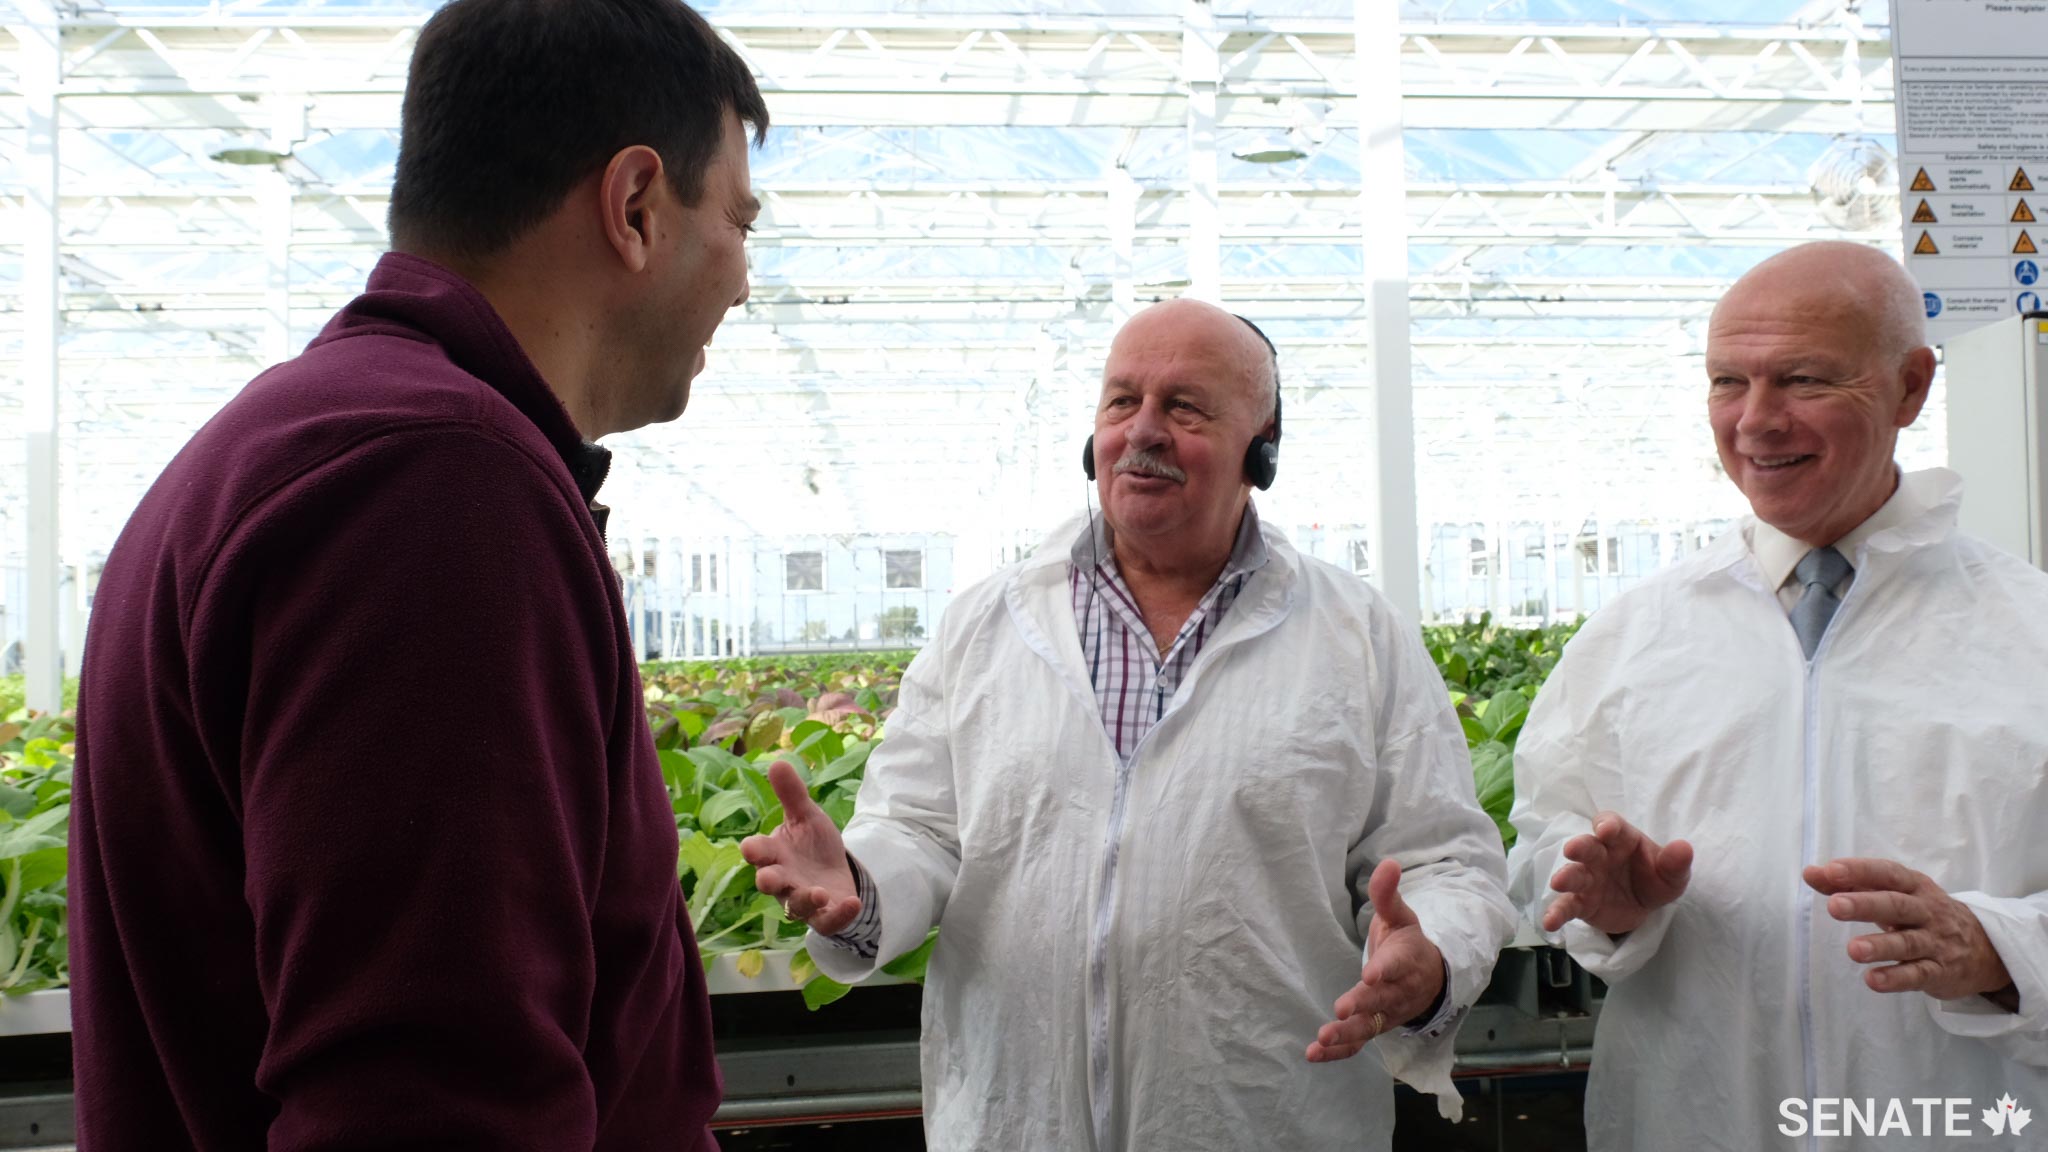 Senators Terry Mercer, centre, and Jean-Guy Dagenais, right, visit Lufa Farms, a greenhouse on Montreal Island that allows farmers to grow vegetables in an urban environment, reducing transportation requirements. In addition, the use of rooftops for growing food takes advantage of space that would otherwise be lost.